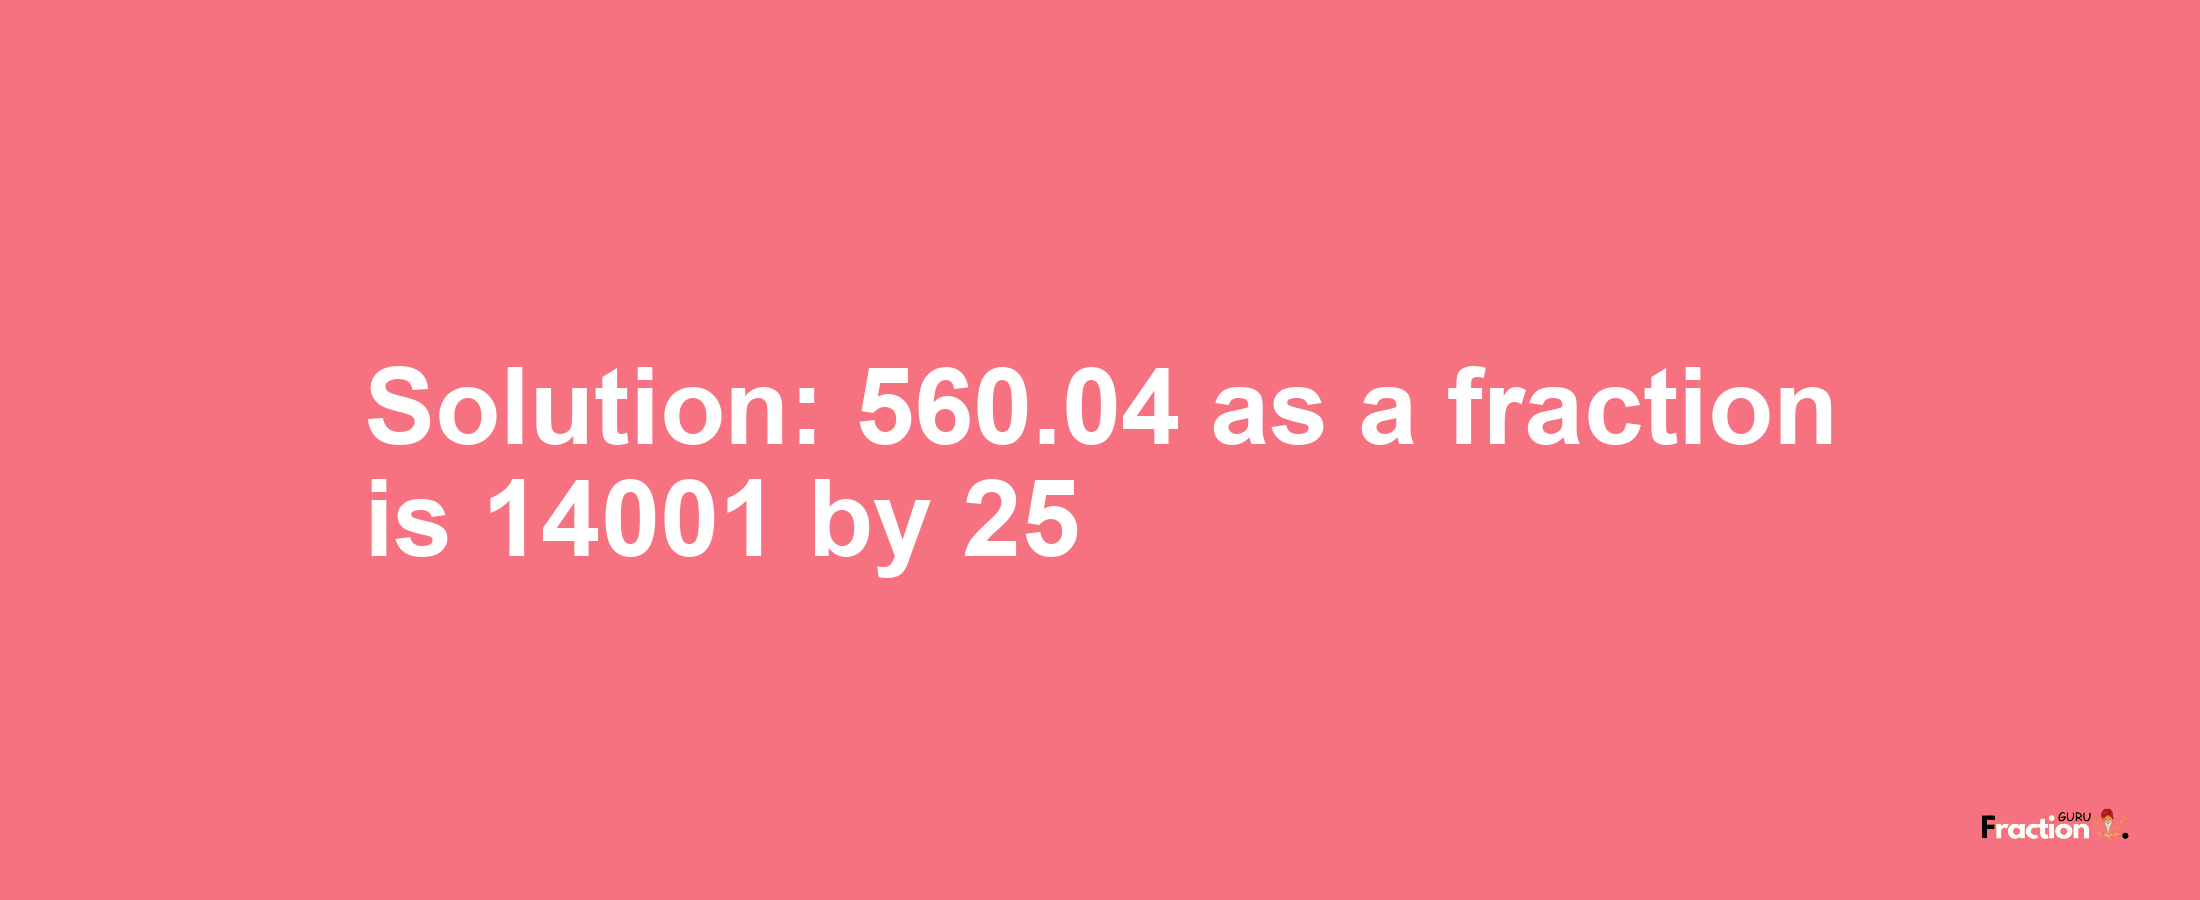 Solution:560.04 as a fraction is 14001/25